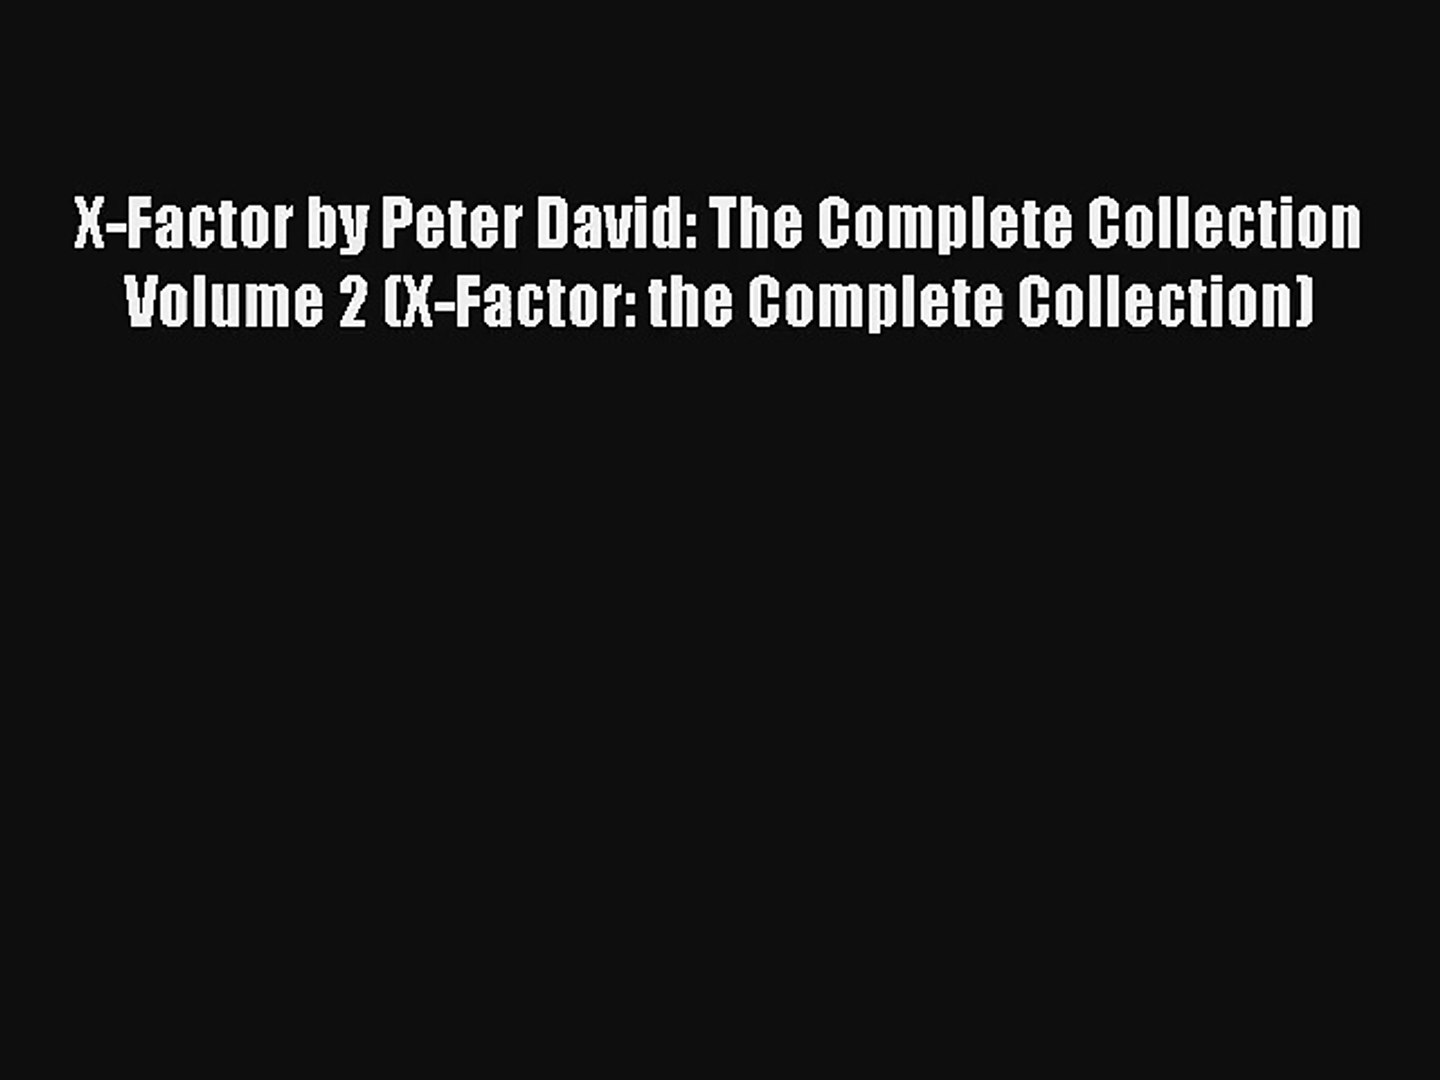 X-Factor by Peter David: The Complete Collection Volume 2 (X-Factor: the Complete Collection)